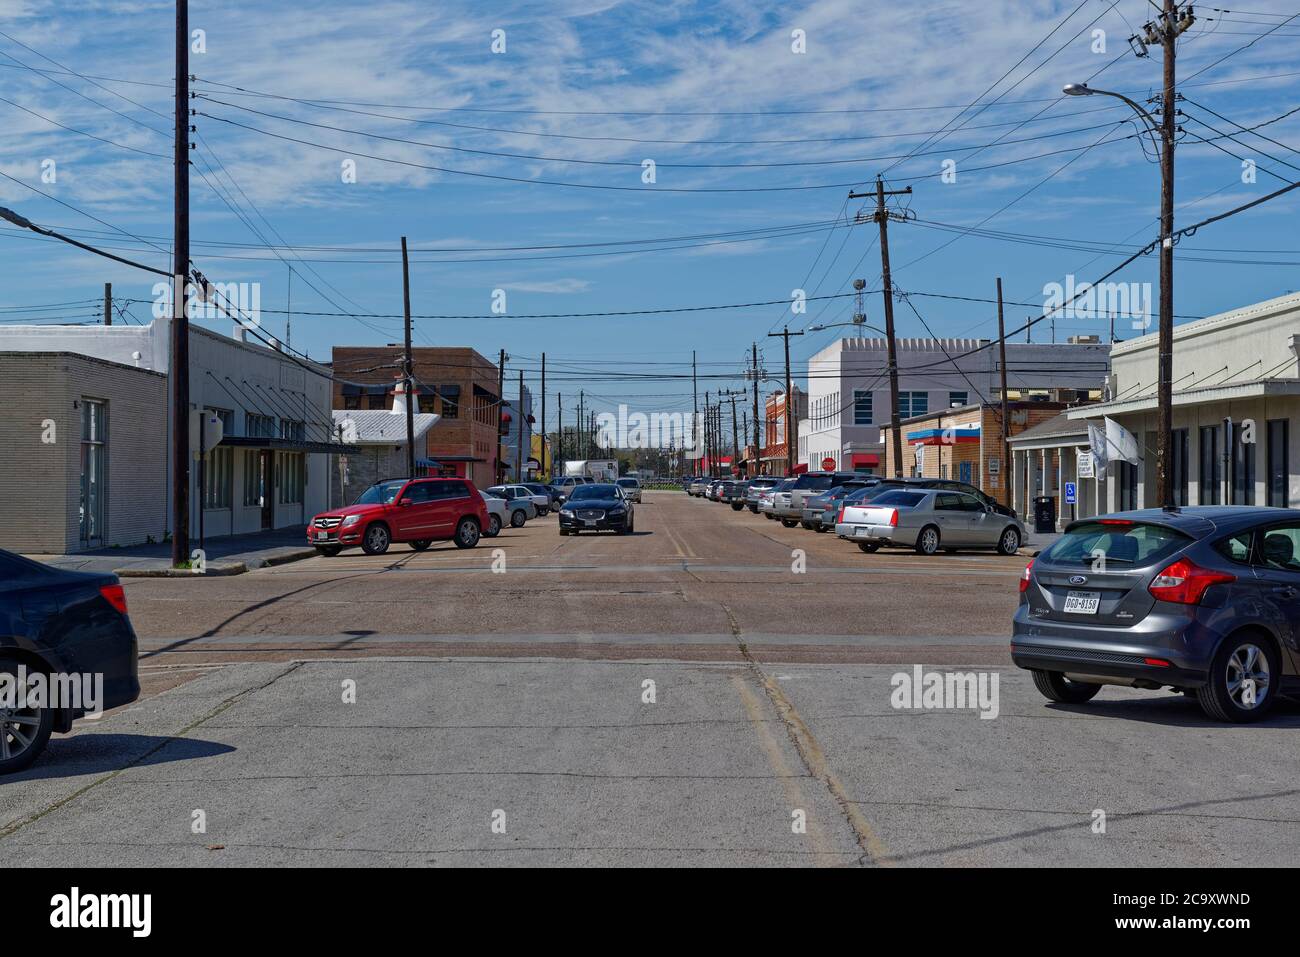 Looking down a straight street in Rosenberg, Texas with Parked cars, and a Jaguar Car on the road on a sunny day in March. Stock Photo